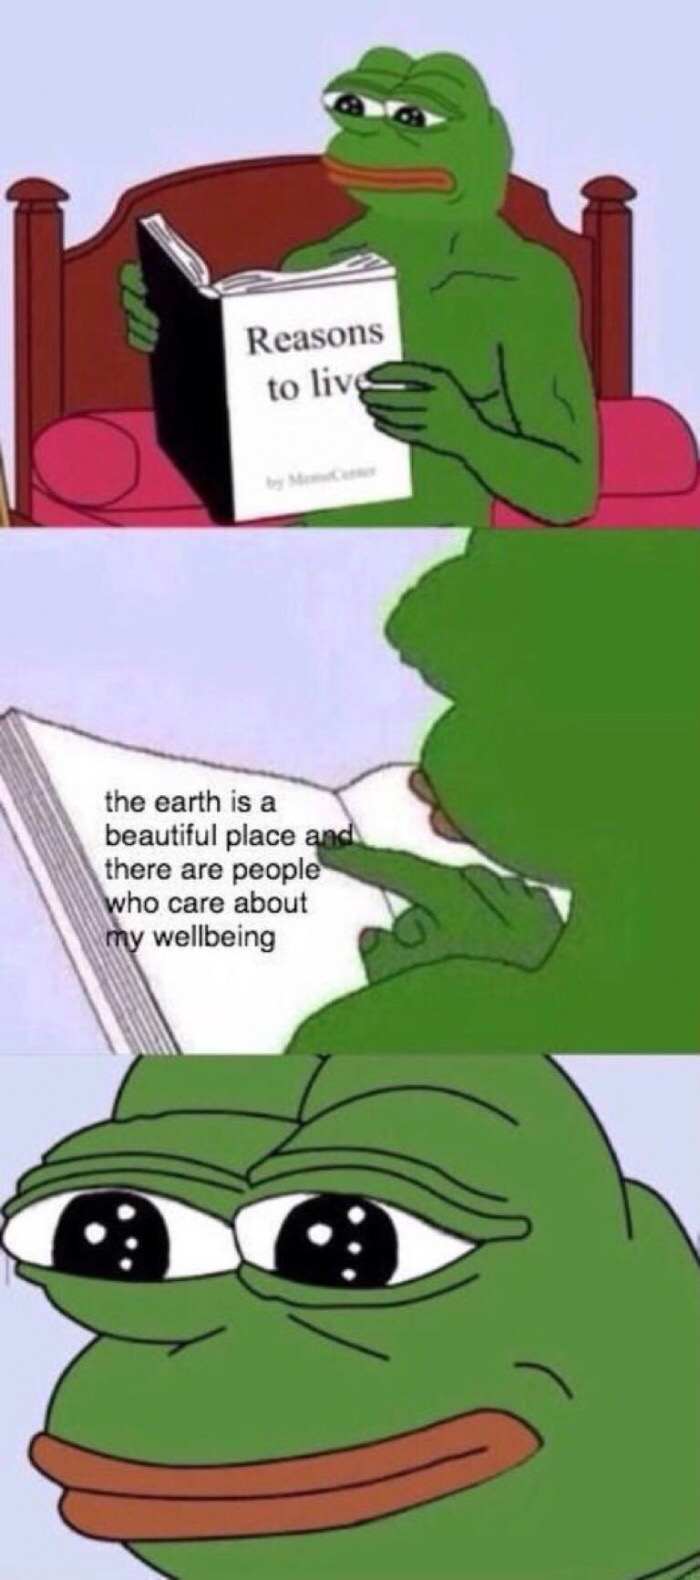 wholesome meme - Reasons to live the earth is a beautiful place and there are people who care about my wellbeing